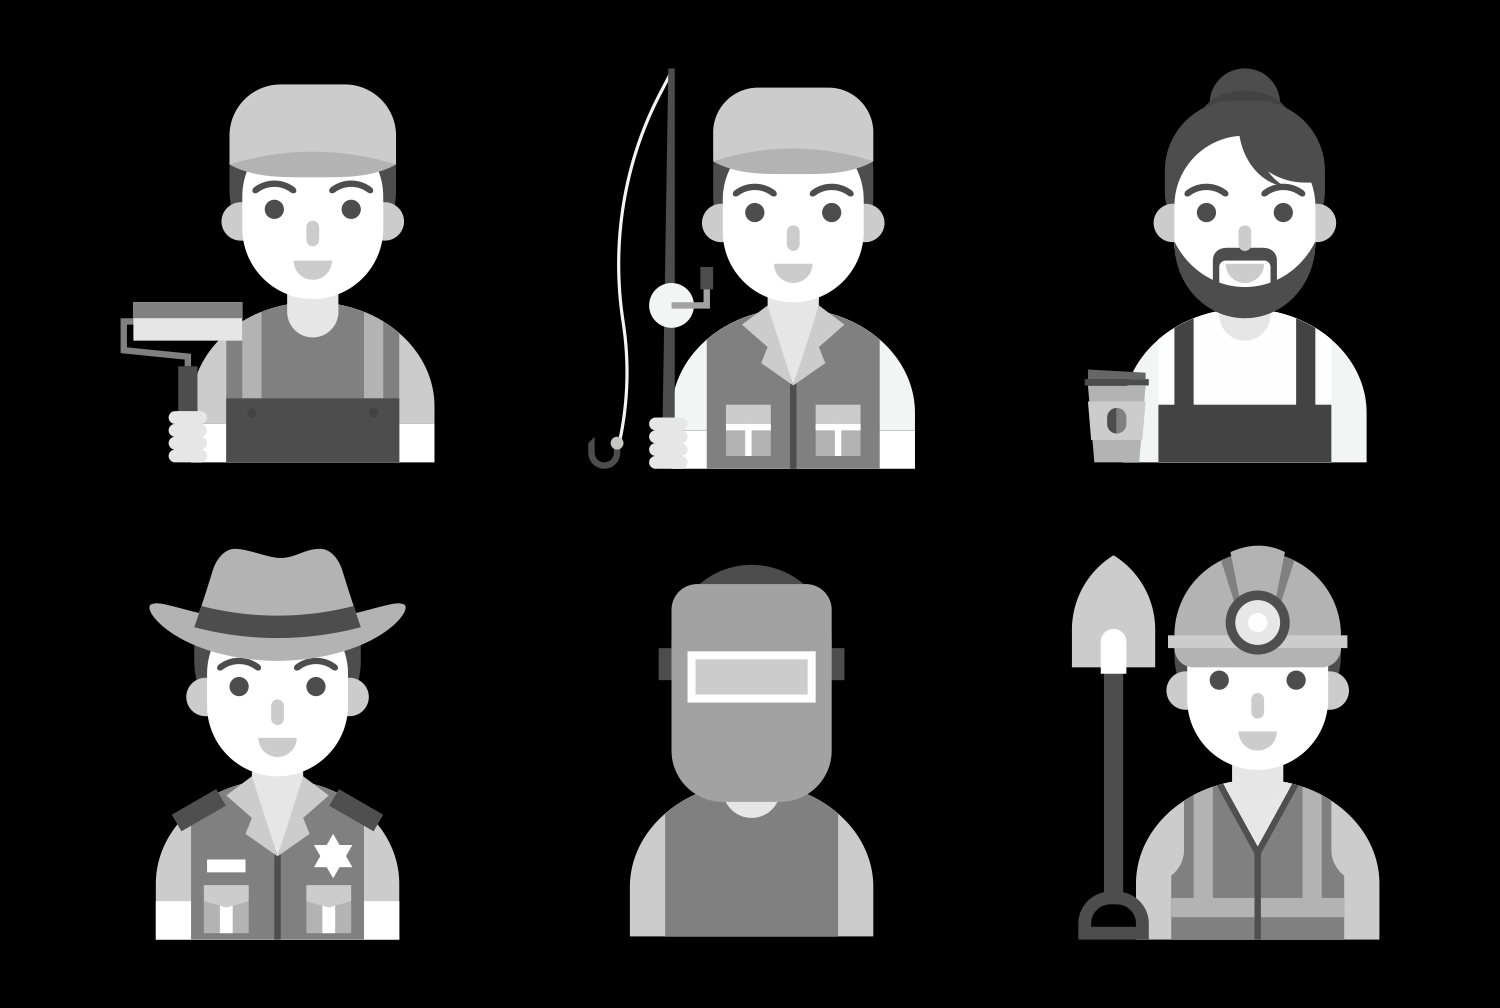 free vector Profession and job related icon set design CDR file download for free